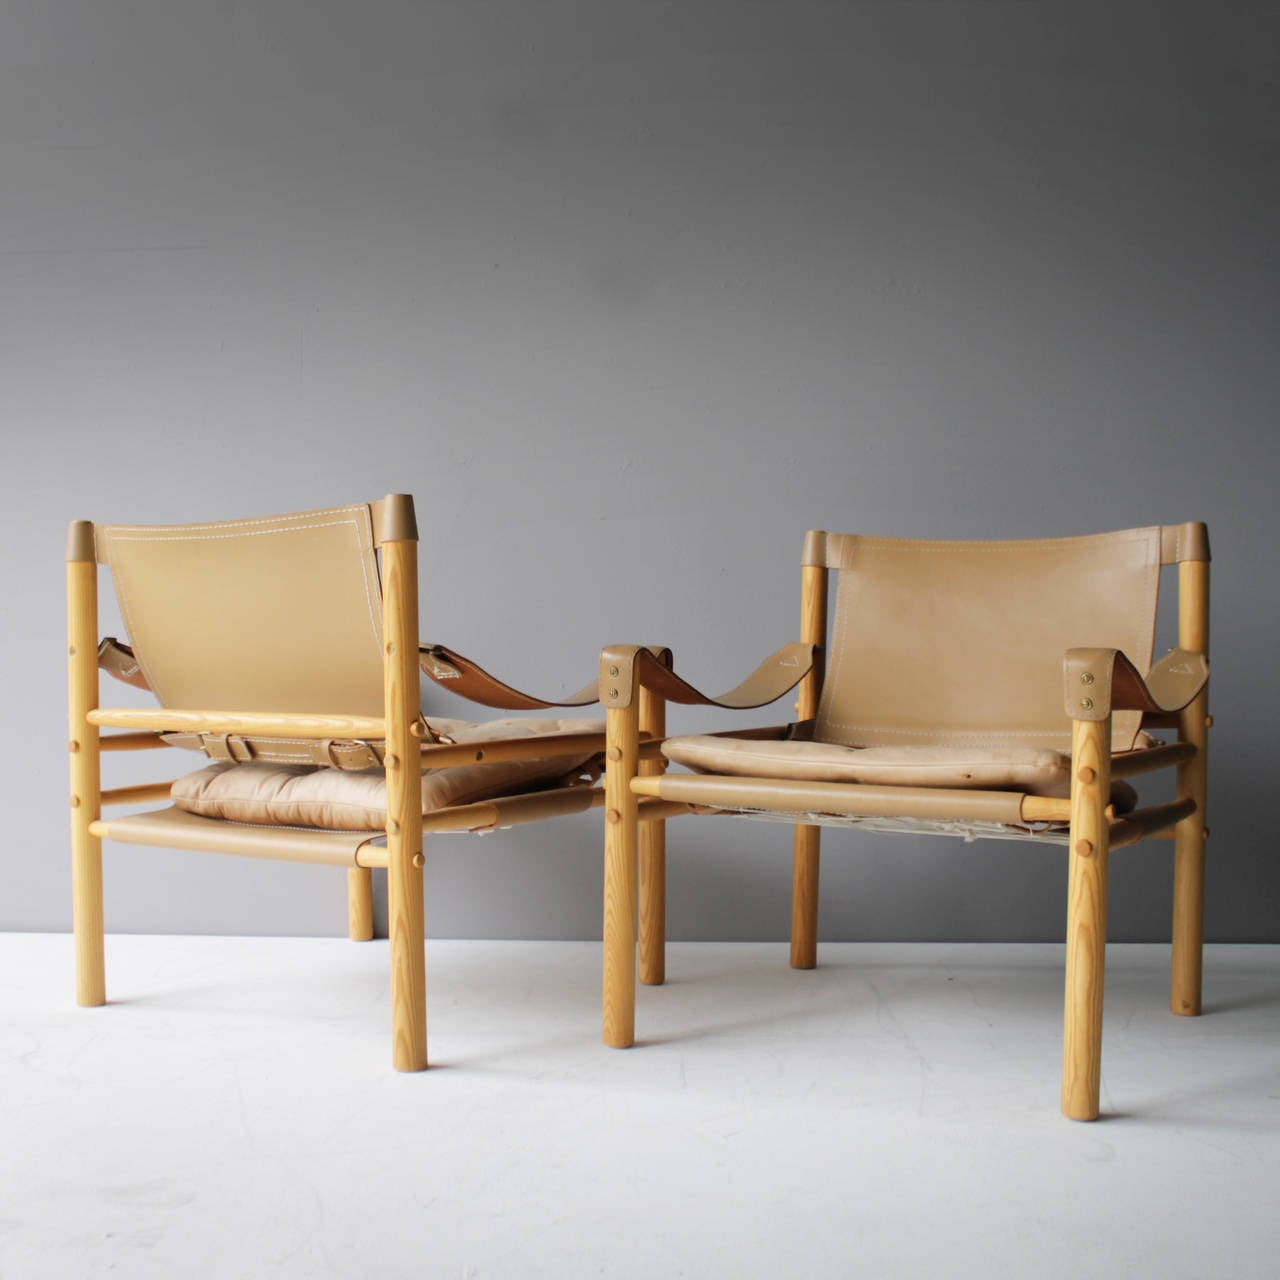 Scandinavian Modern Pair of 'Scirocco' Safari Chairs by Arne Norell